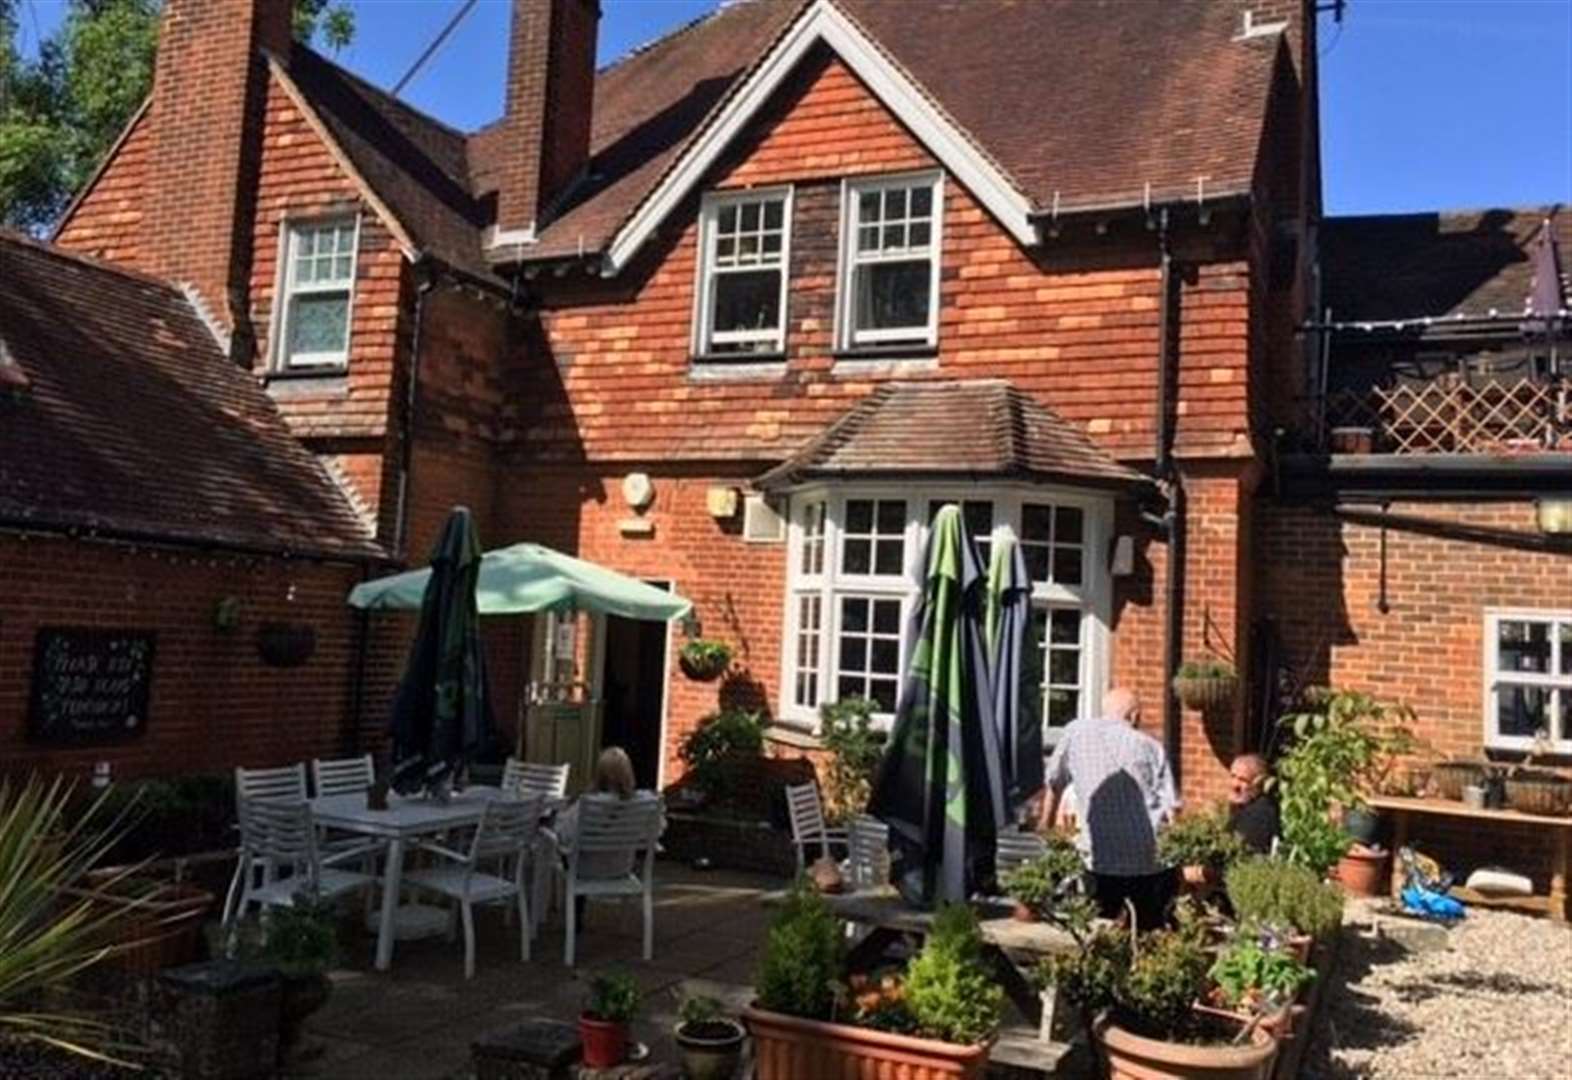 'A brilliant beer garden, pool and two bathing beauties'